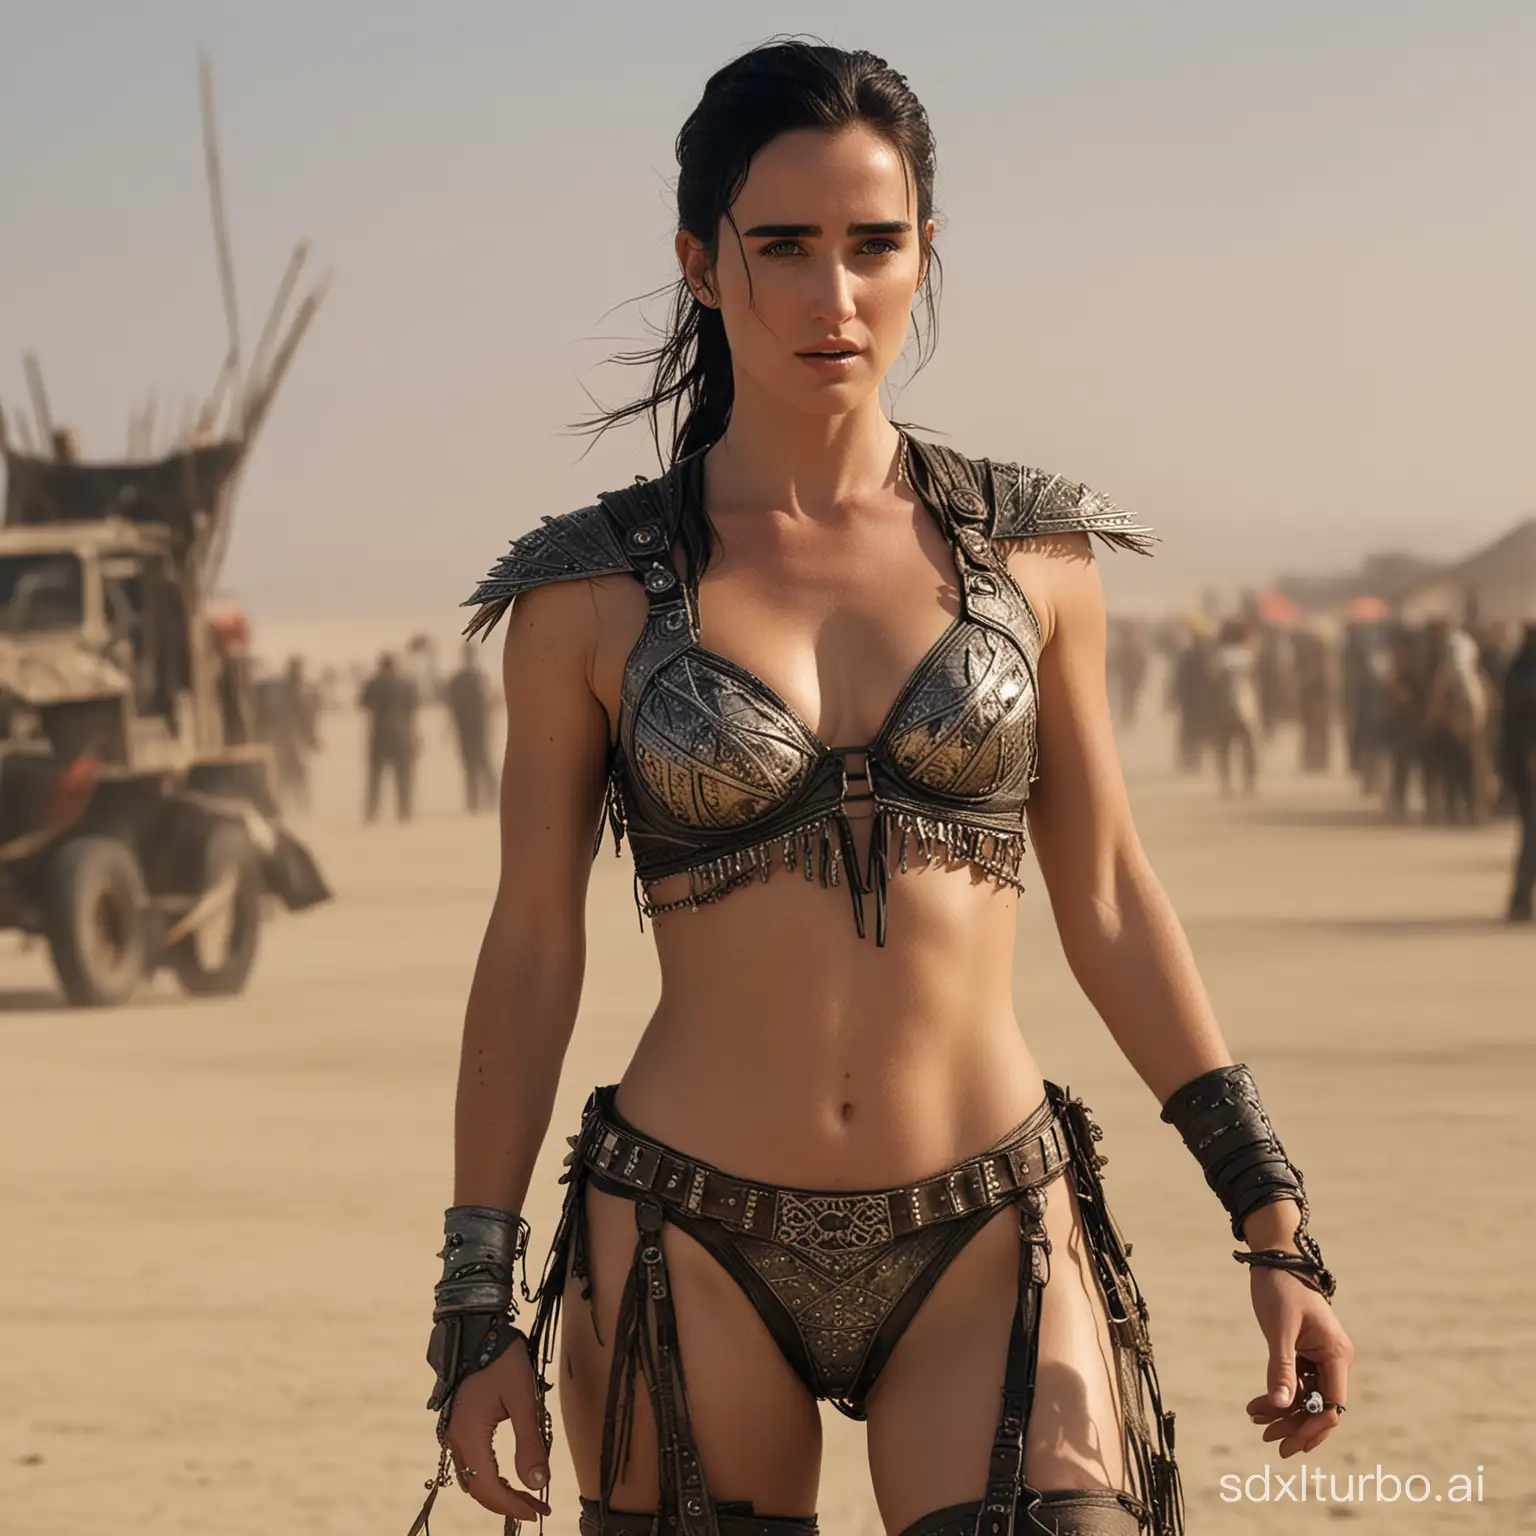 young Jennifer Connelly in revealing sexy costume on "burning man" music festival.  Mad max like environment. Intricate details. side photo